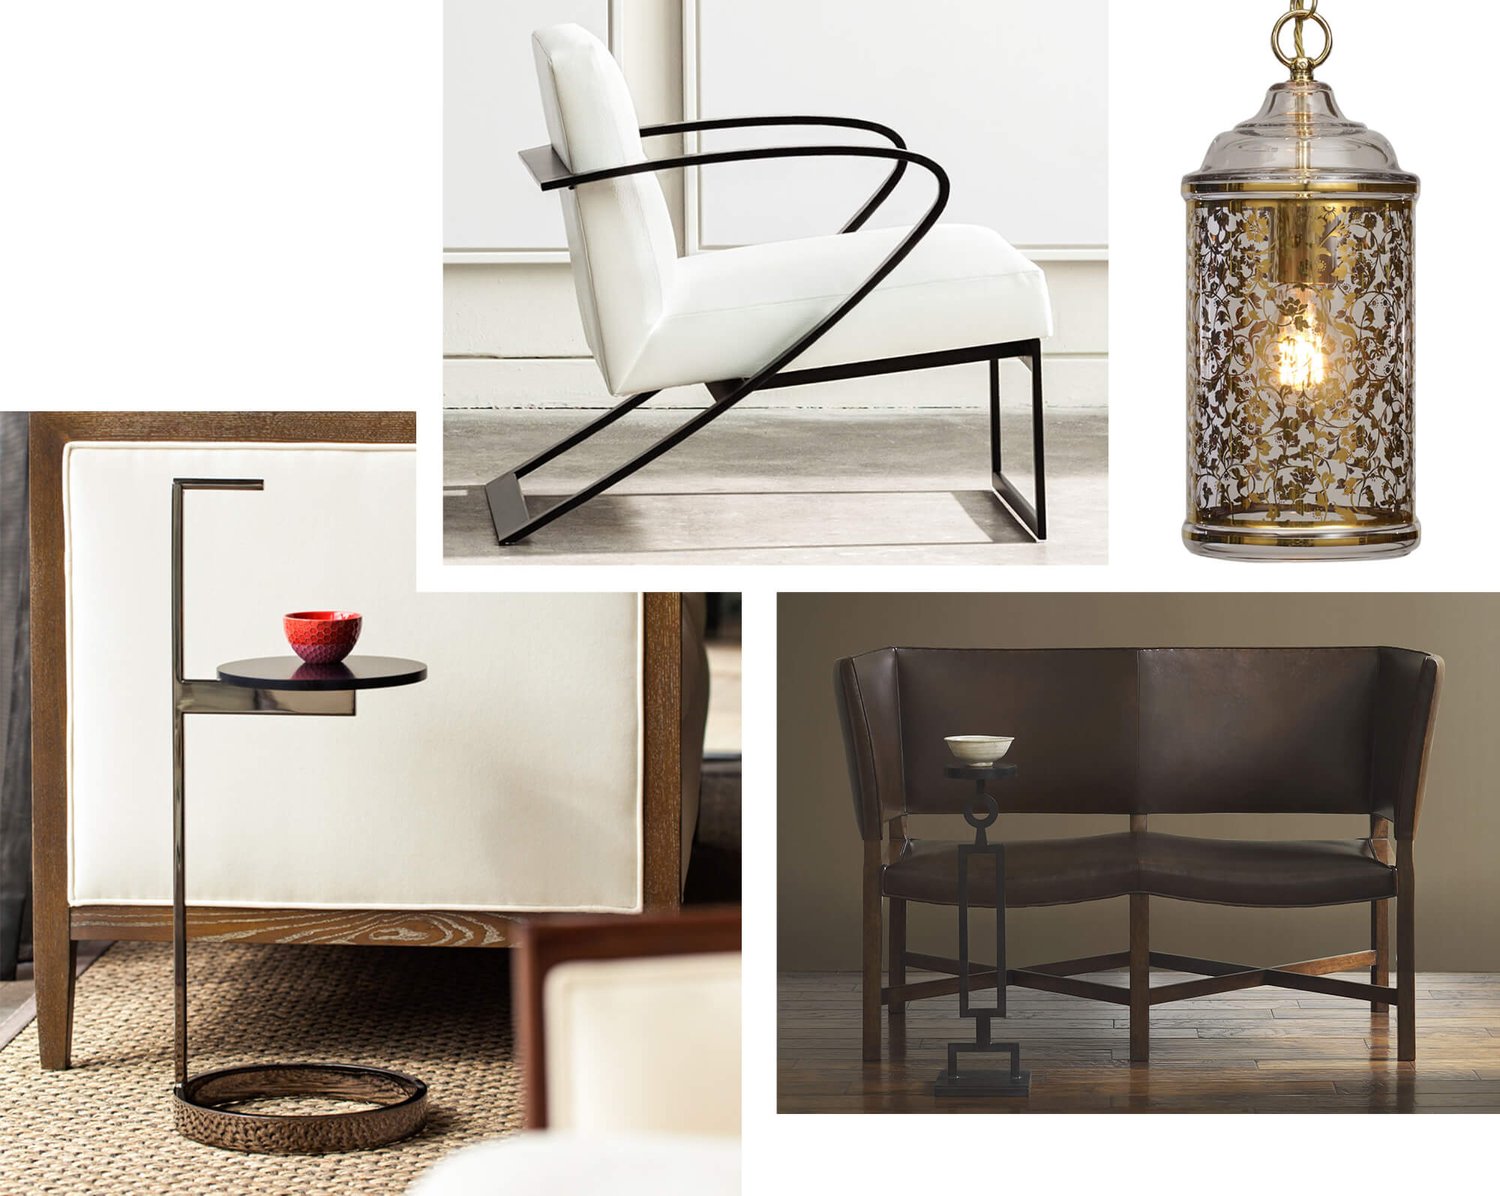 Four images showing different furniture pieces: a low modern armchair with curved metal base and upholstered seat and back; a small side table with round metal base and arm; a two-person bench with small side table and a lantern style pendant lamp.